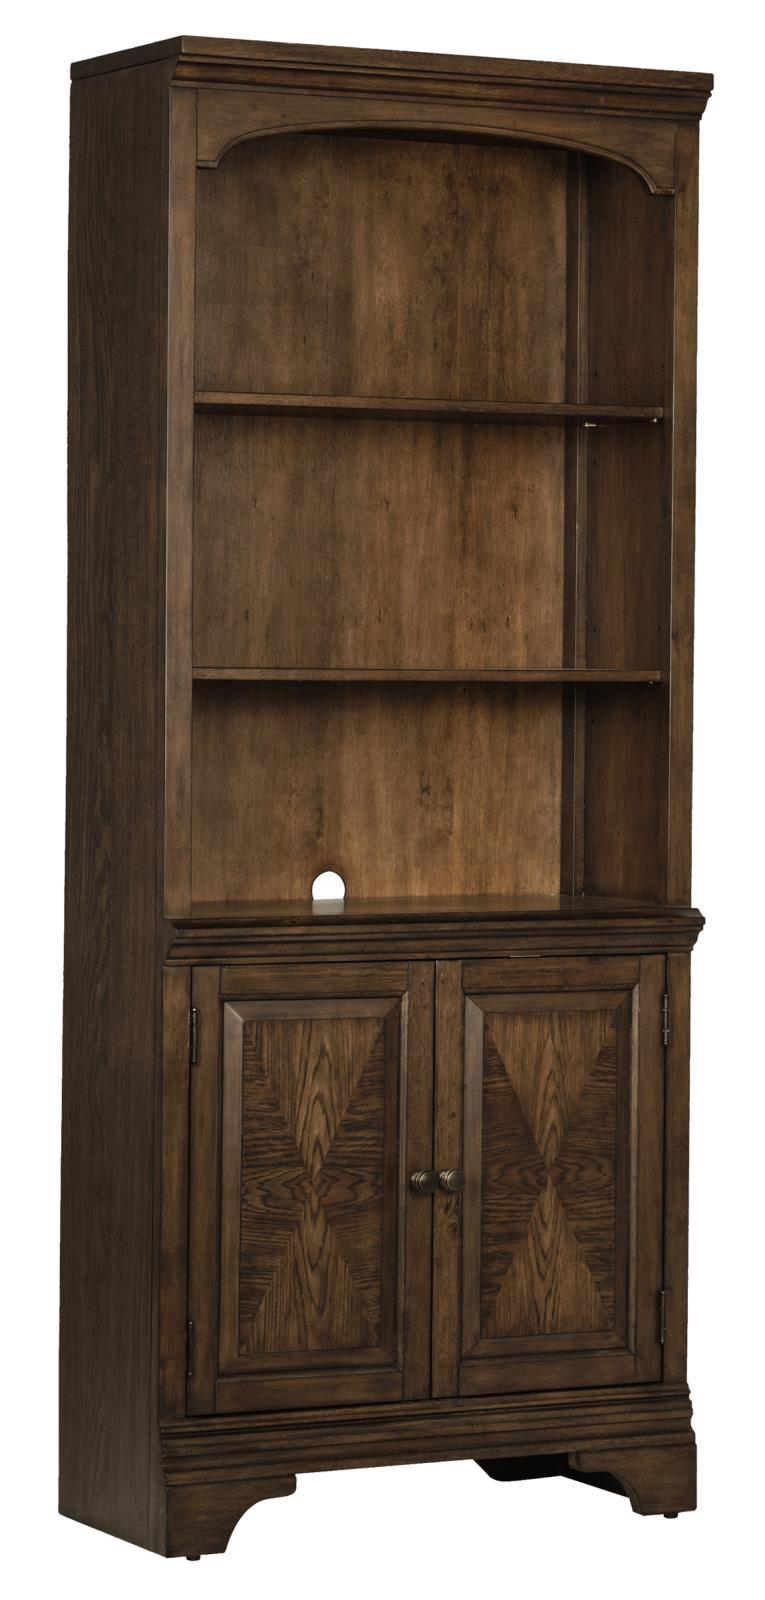 Hartshill Bookcase with Cabinet Burnished Oak Hartshill Bookcase with Cabinet Burnished Oak Half Price Furniture